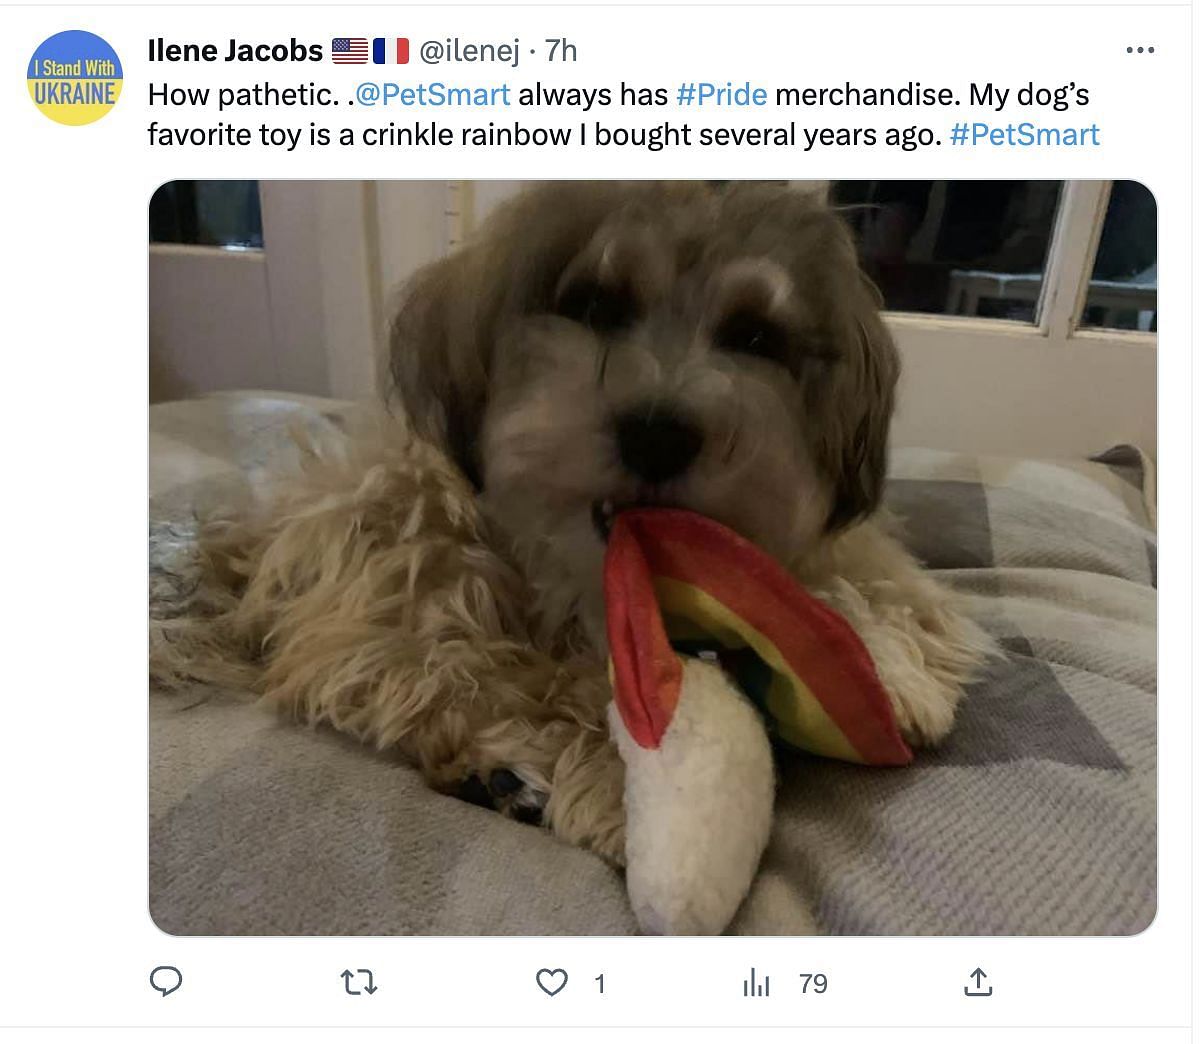 Popular pet brand launches Pride Merchandise to support LGBTQ: Social media users come out in support amidst backlash. (Image via Twitter)